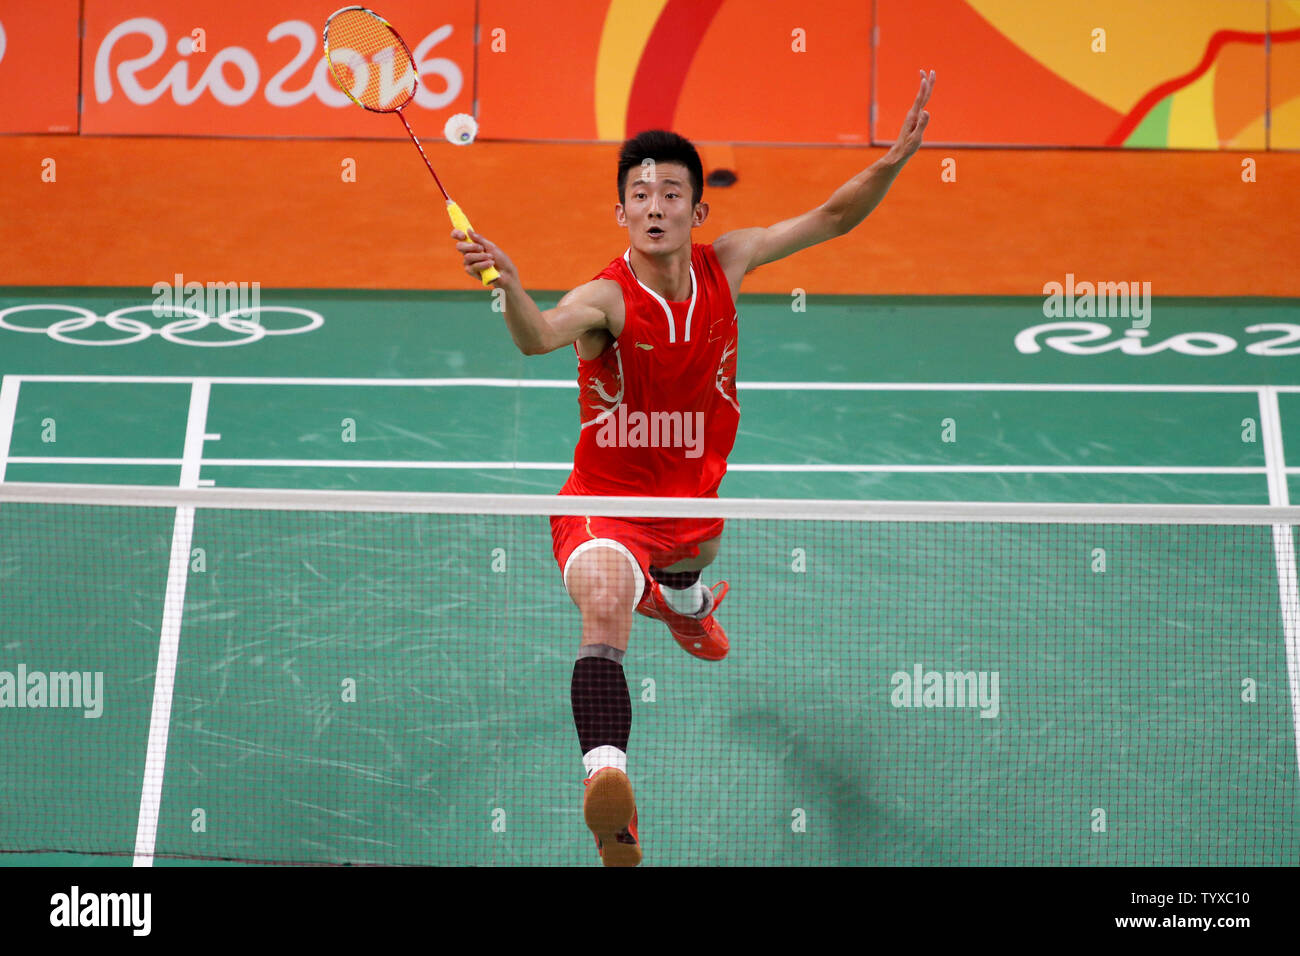 China's Long Chen takes on Malaysia's Chong Wei Lee (not pictured) in the  Men's Badminton Singles gold medal match at the 2016 Rio Summer Olympics in  Rio de Janeiro, Brazil, on August